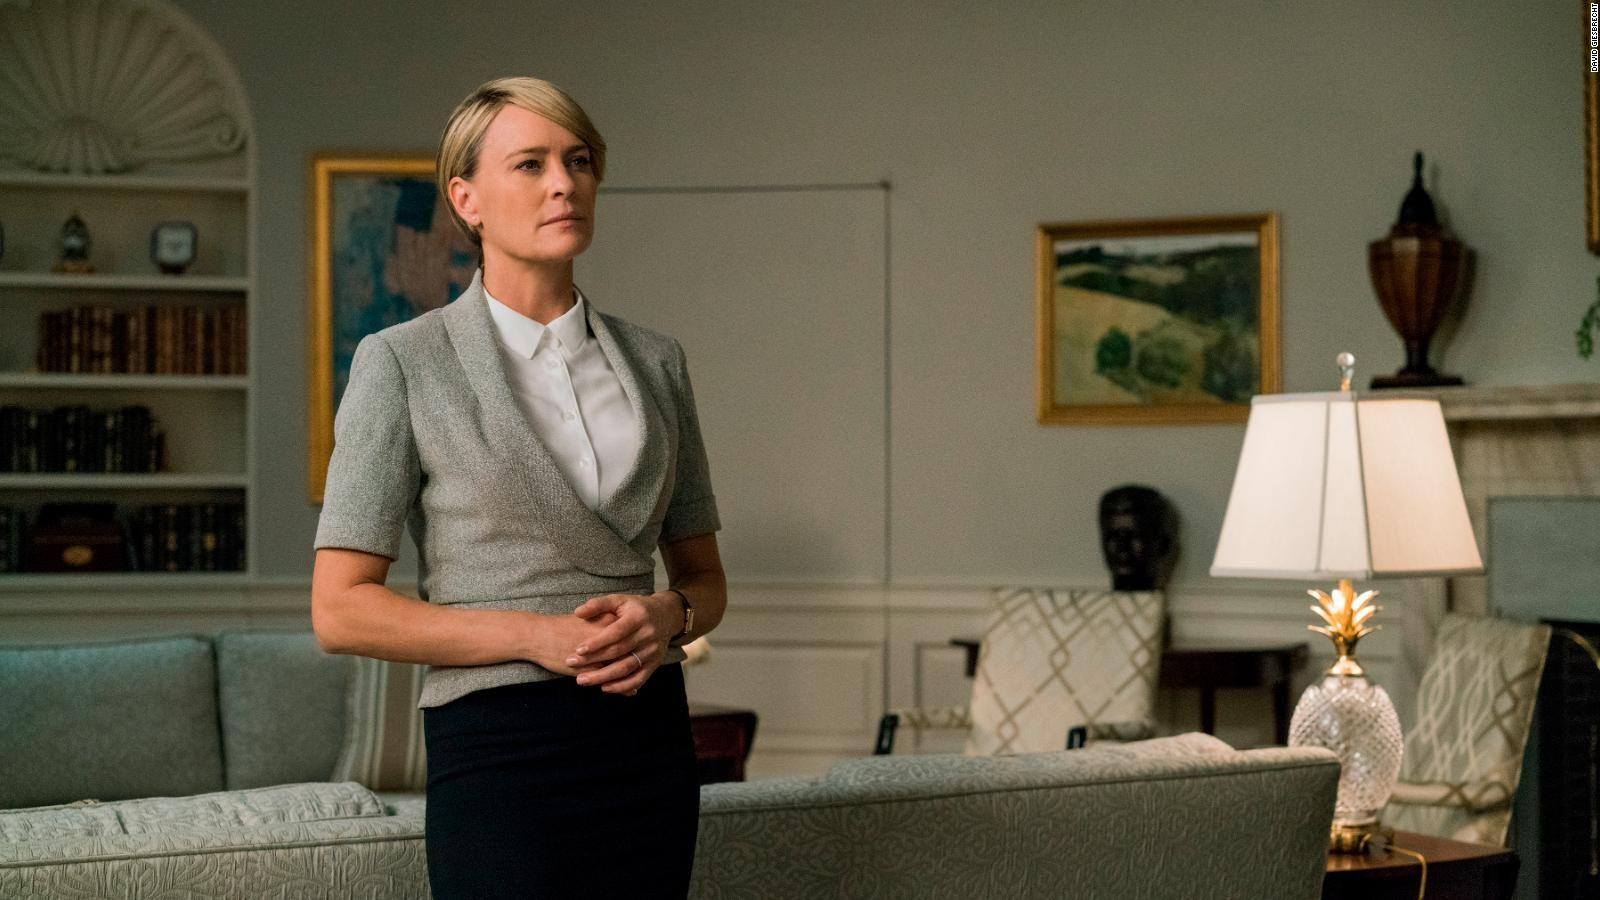 Robin Wright takes lead in 'House of Cards' Season 6 trailer